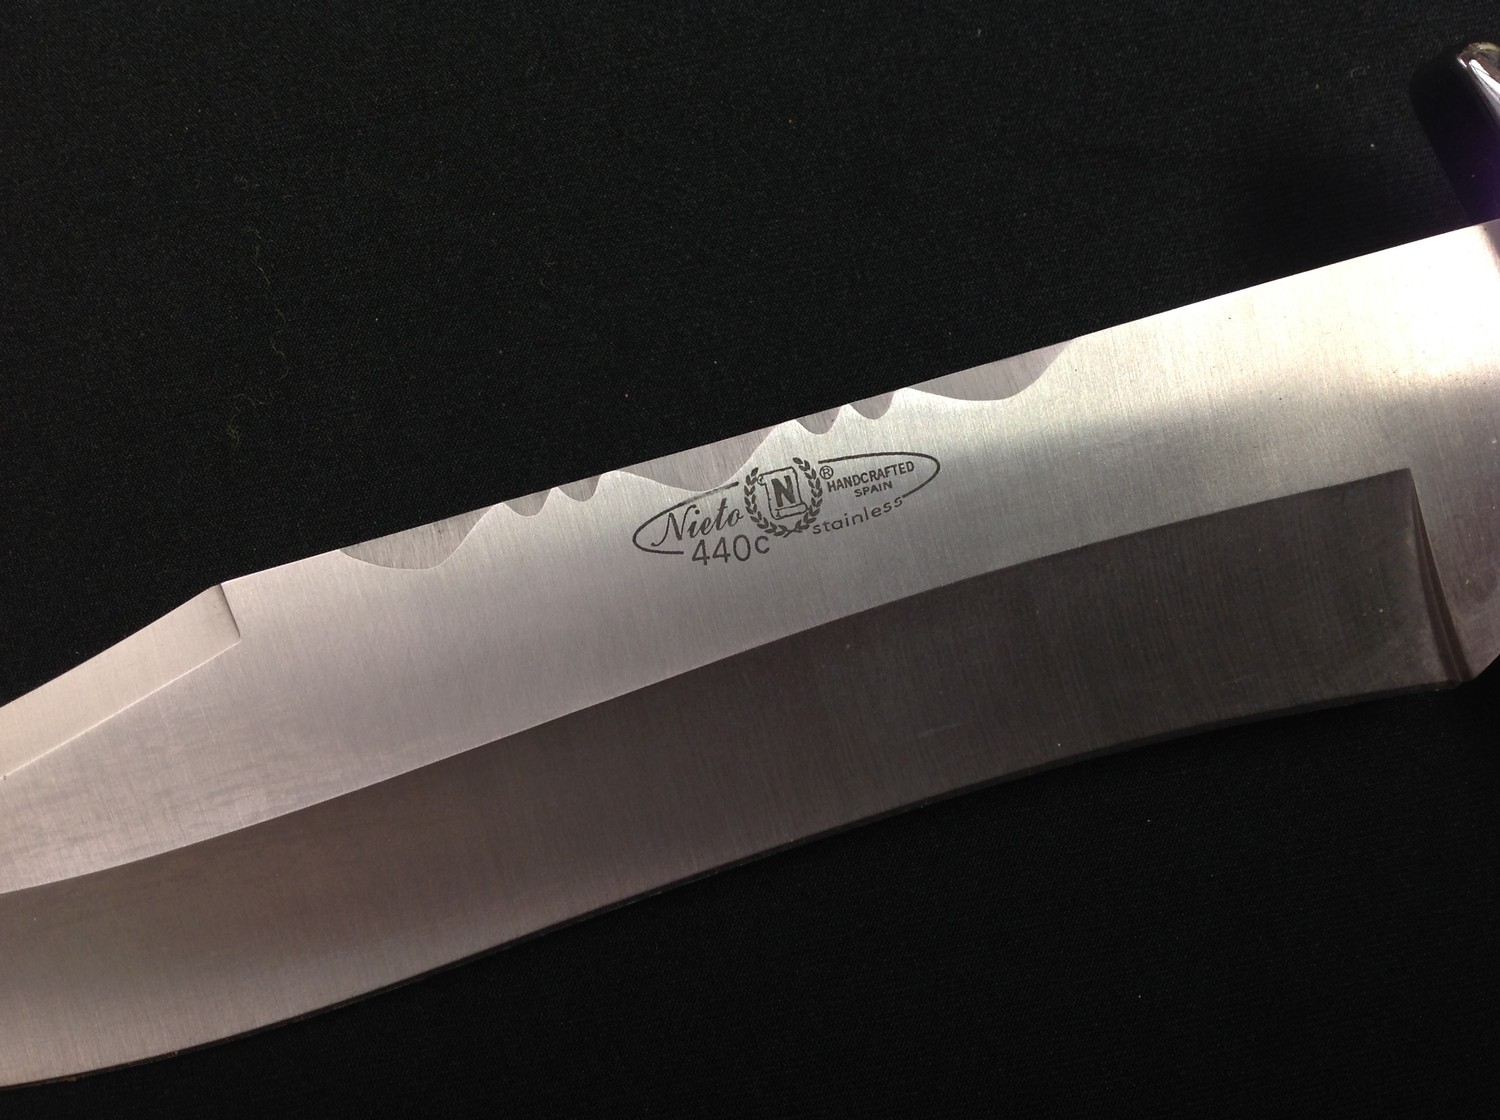 Bowie Knife with 225mm long blade maker marked "Nieto 440c Stainless Handcrafted, Spain". Width of - Image 5 of 11